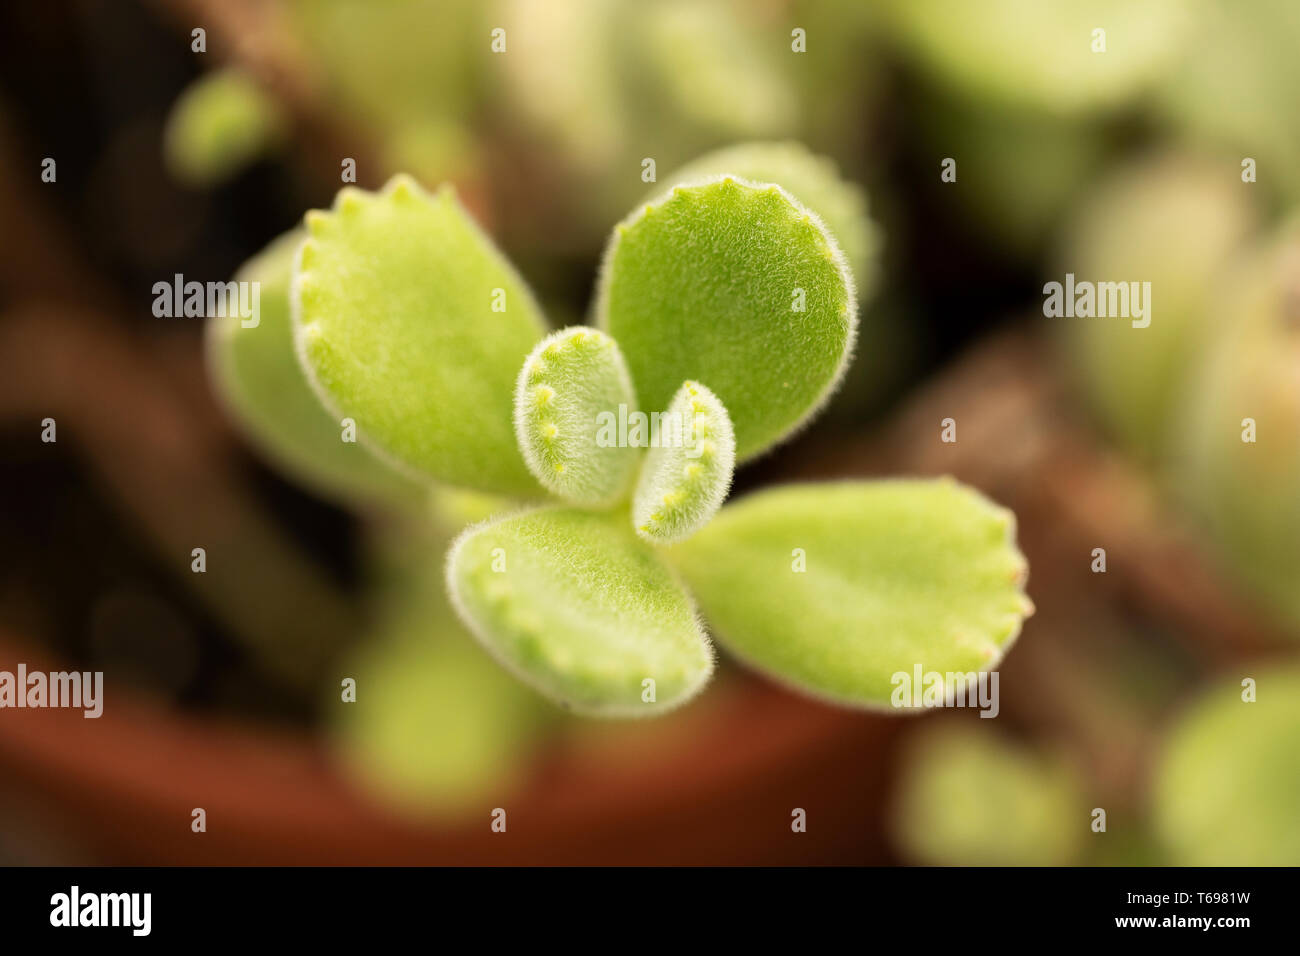 Bear's paw (Cotyledon tomentosa), a plant native to Africa with green fuzzy leaves that look like bear paws. Stock Photo